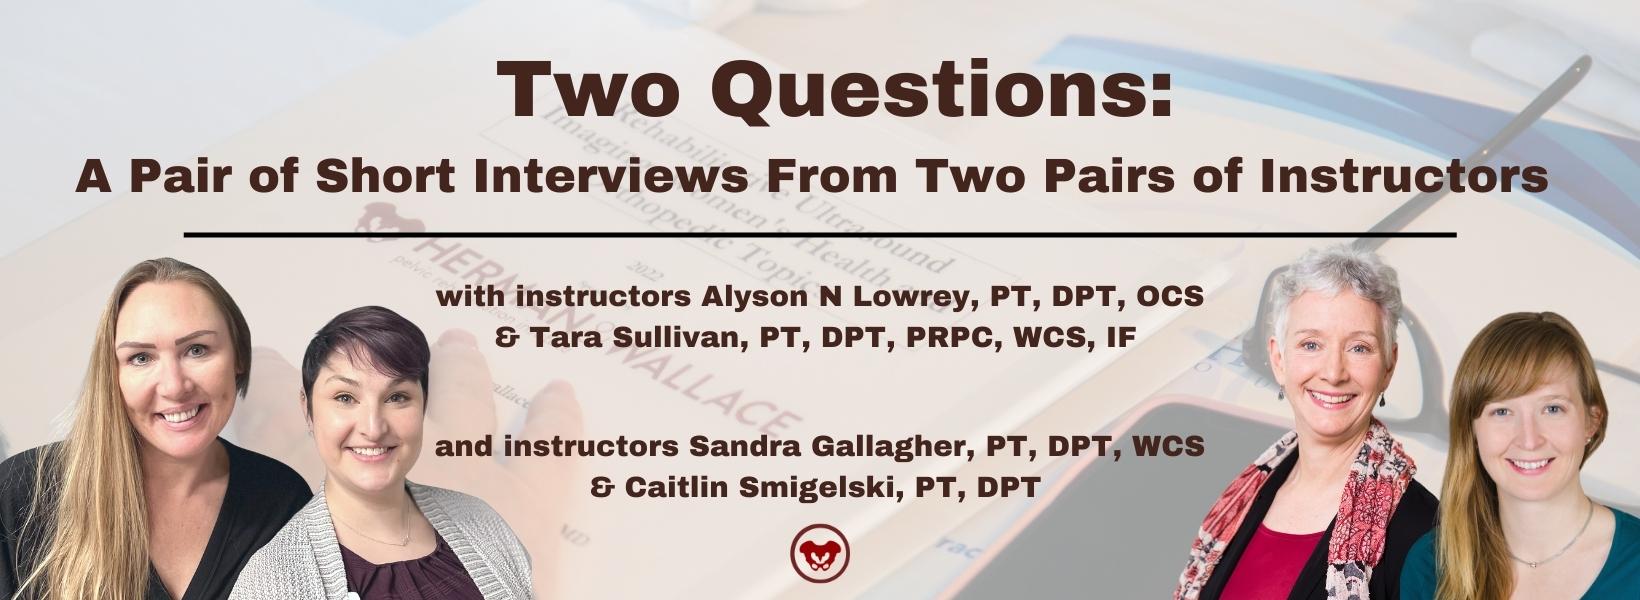 Two Questions: A Pair of Short Interviews From Two Pairs of Instructors